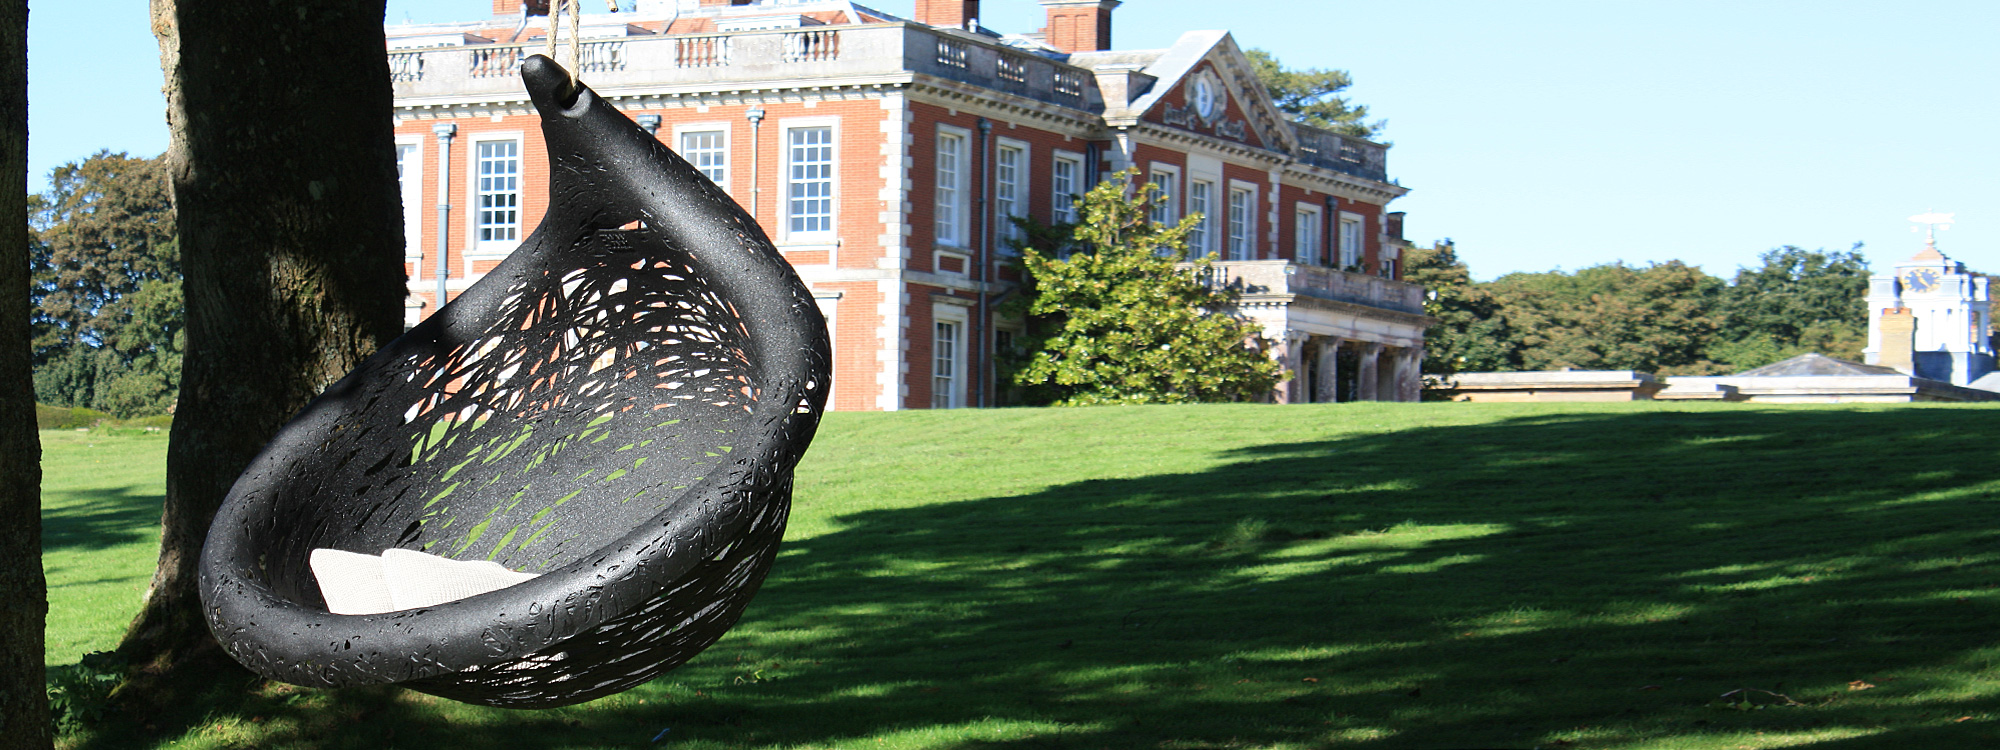 Image of Bios Lucid black swing chair by Unknown Nordic, with Stansted House stately home in the background